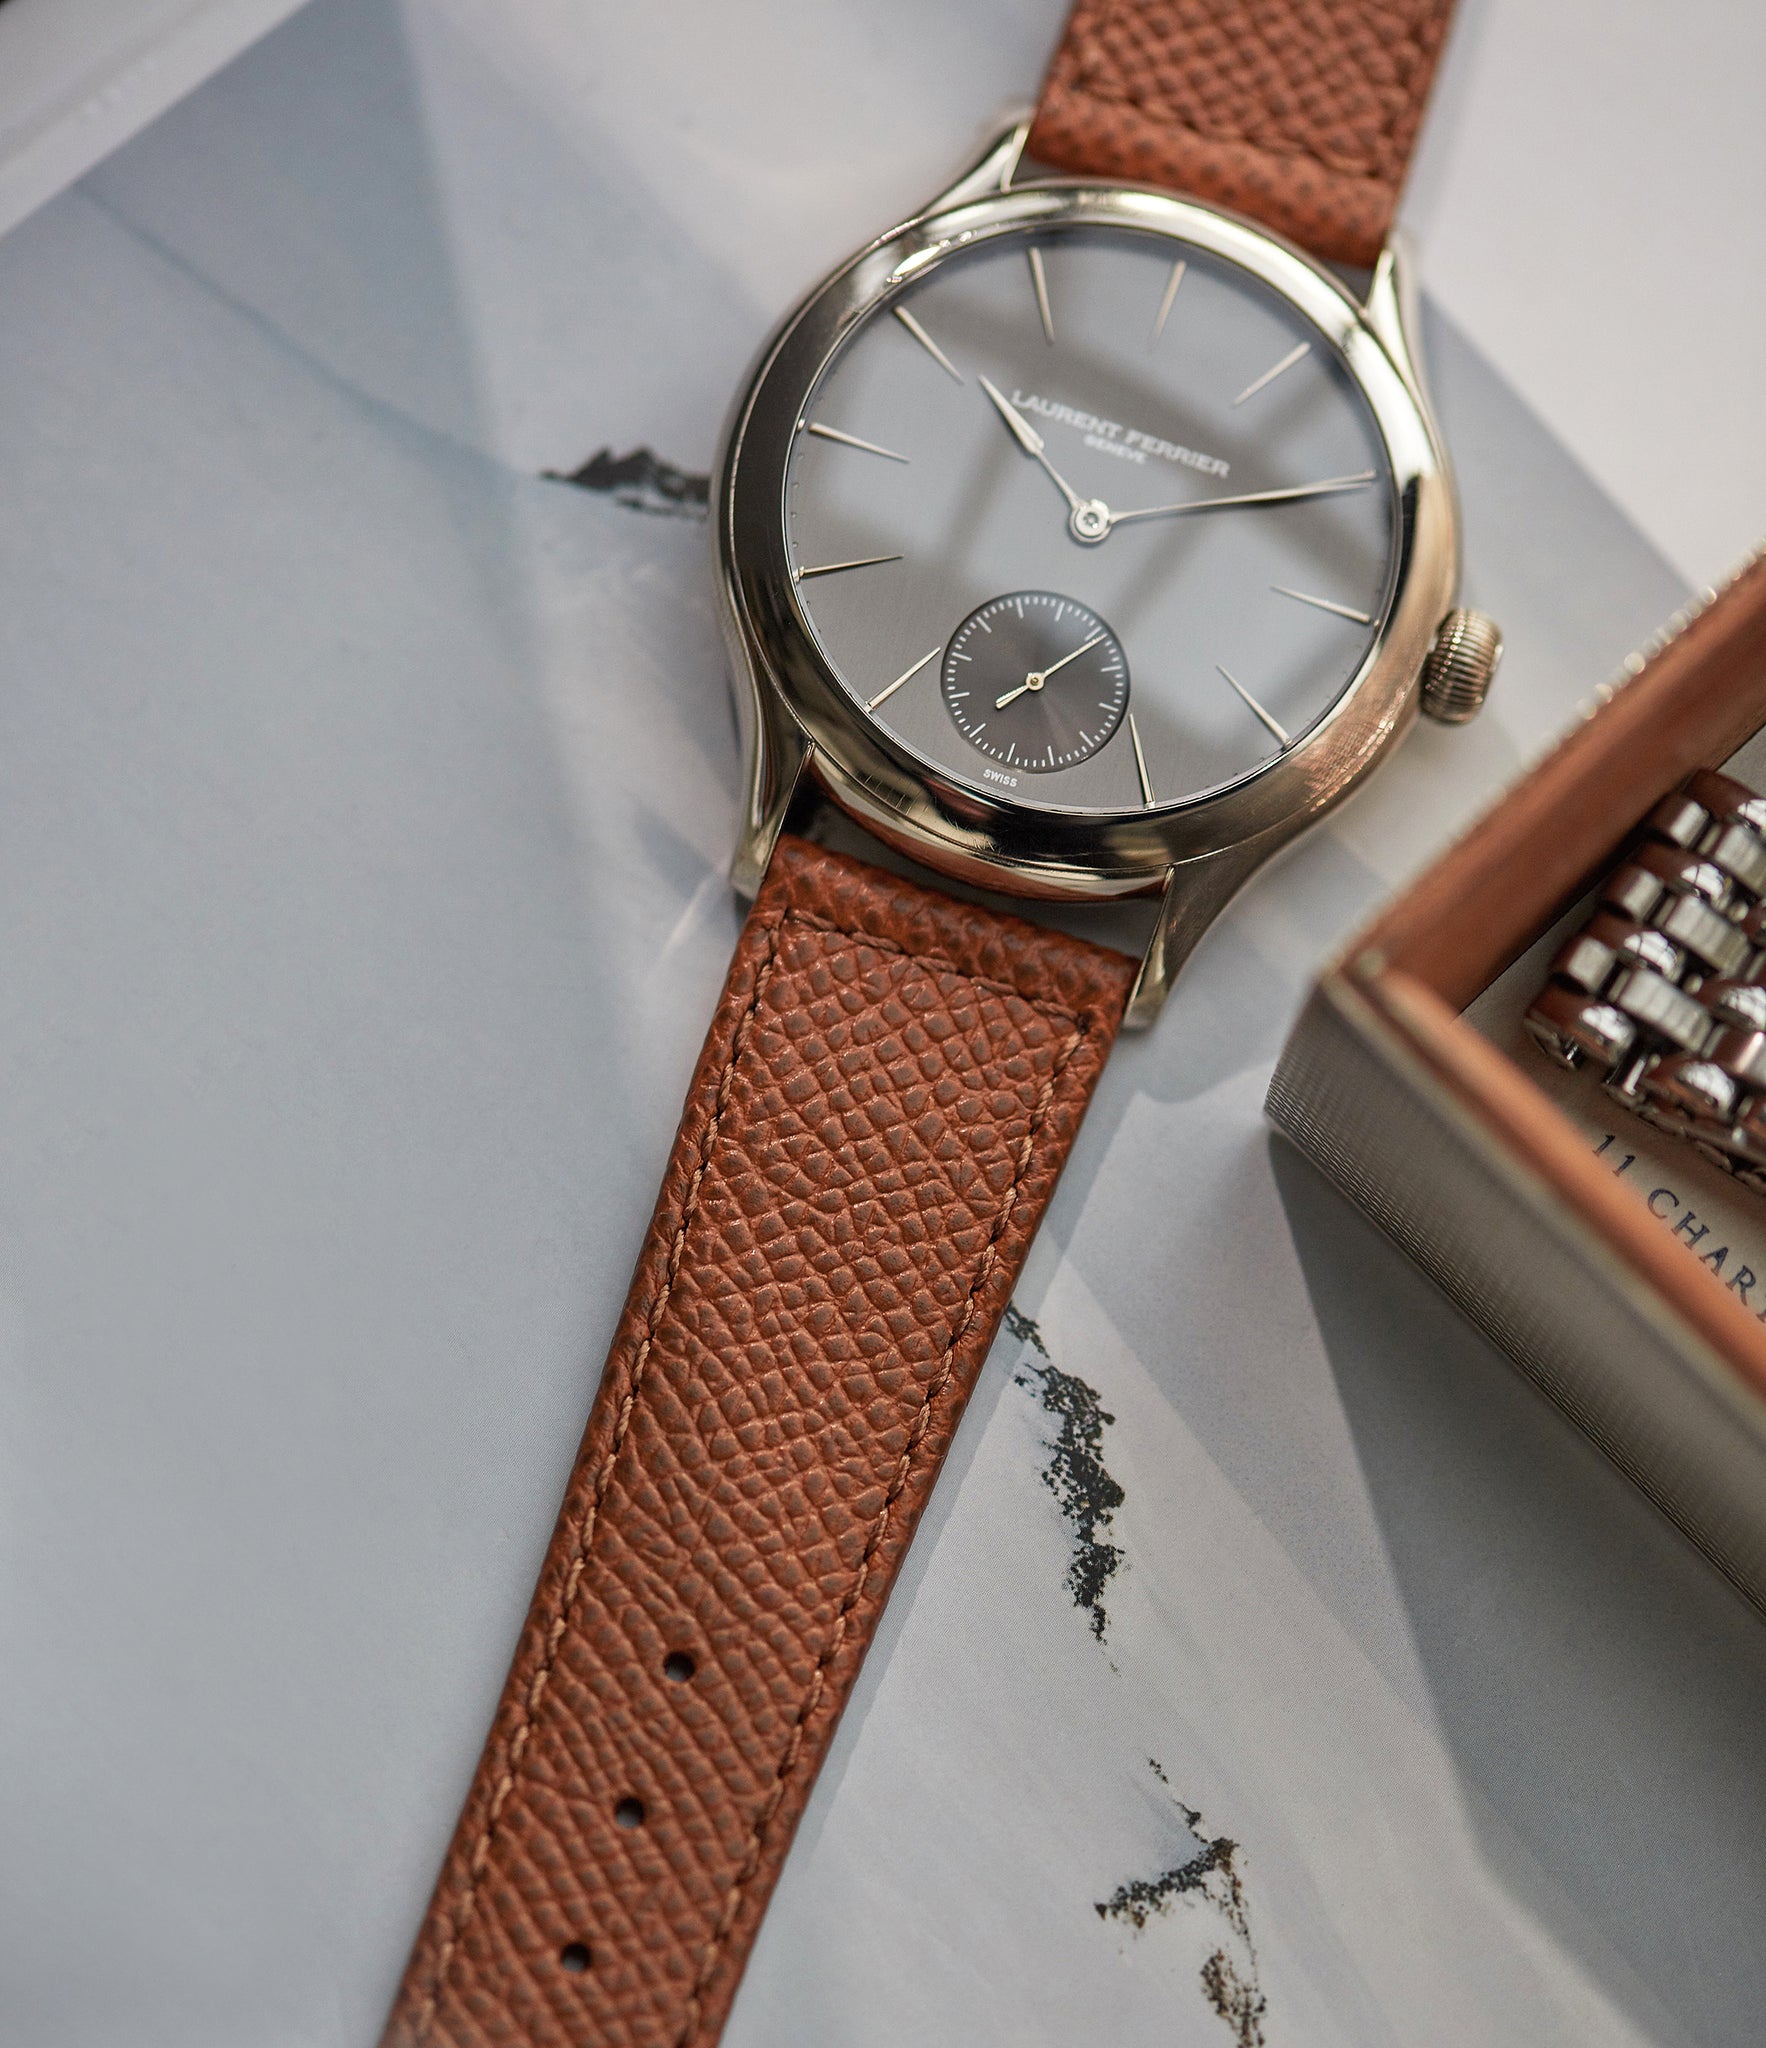 Order Marrakesh II JPM watch strap Laurent Ferrier safari tan brown saffiano leather box stitched quick-release springbars buckle handcrafted European-made for sale online at A Collected Man London